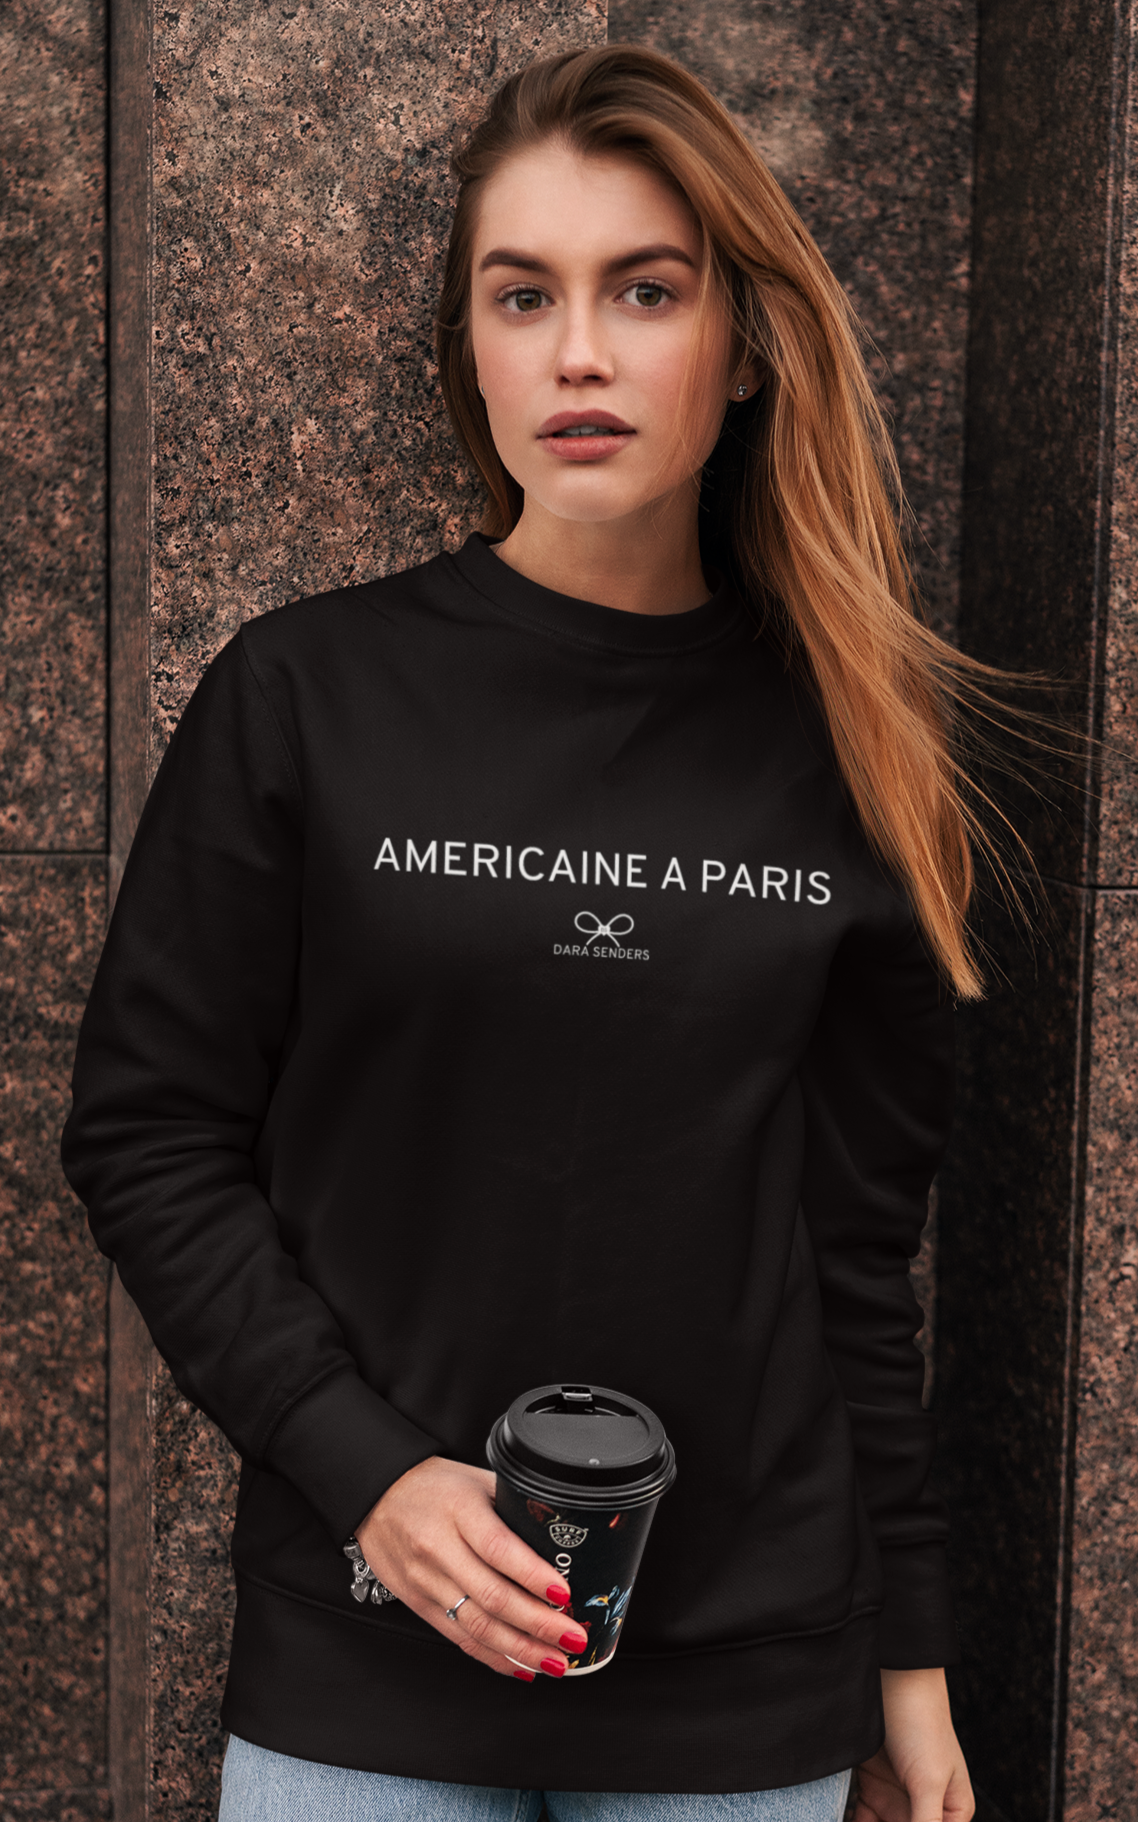 AMERICAINE A PARIS • EMBROIDERED PULLOVER